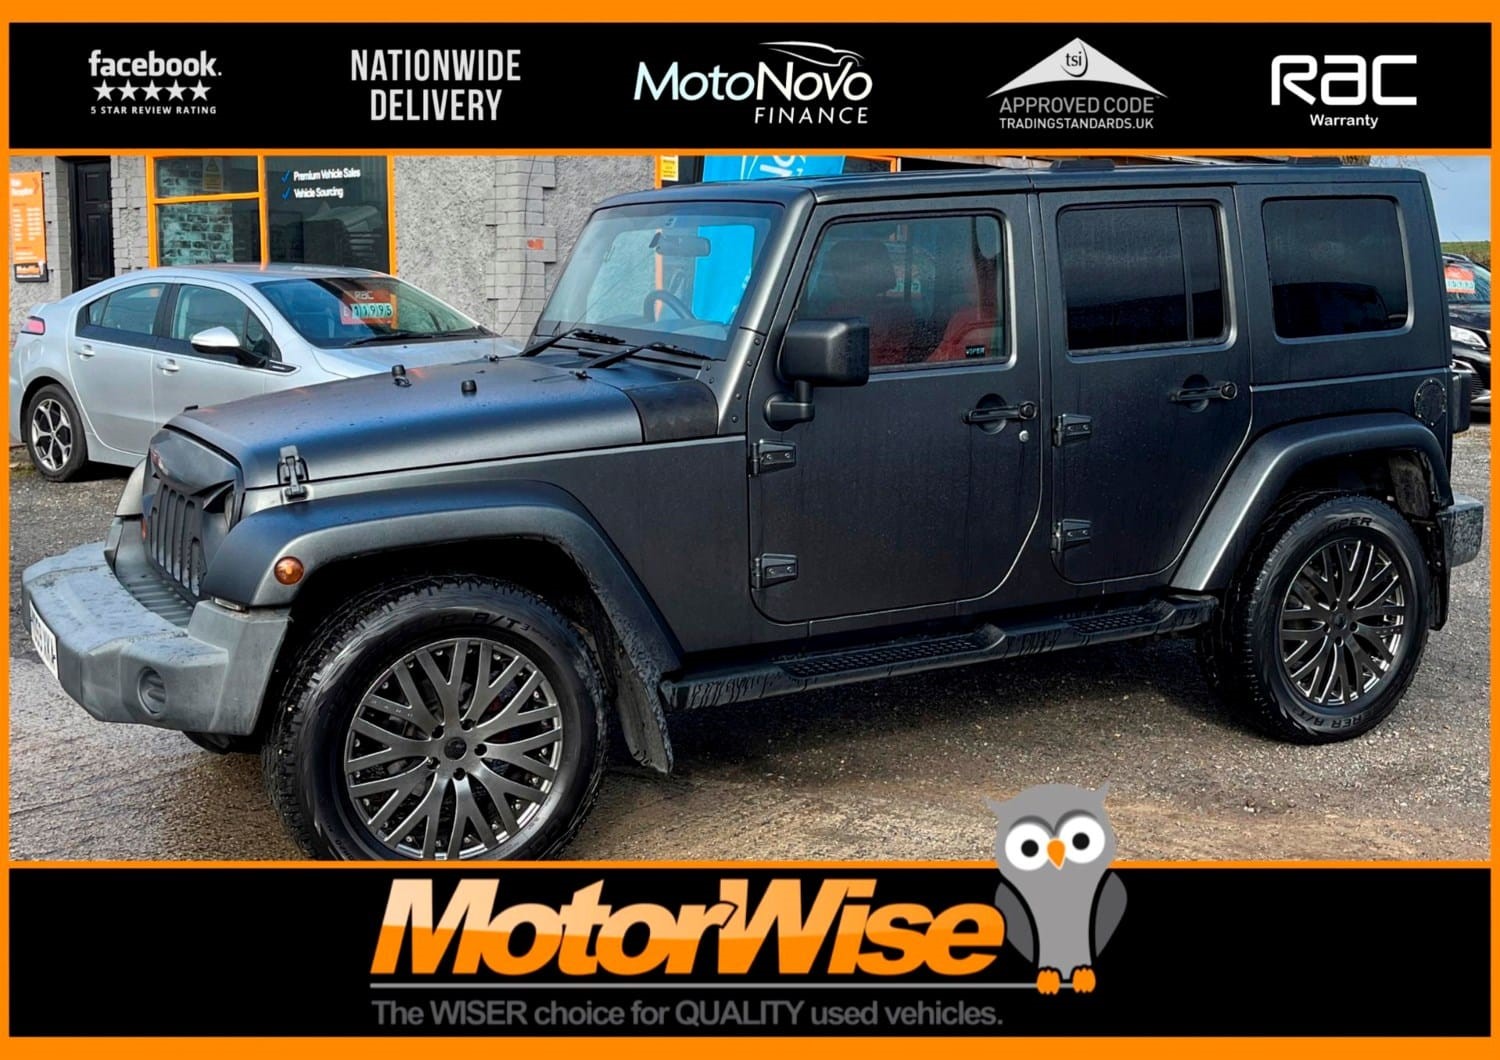 Used Jeep Wrangler for sale in Lincoln, Lincolnshire | Motorwise